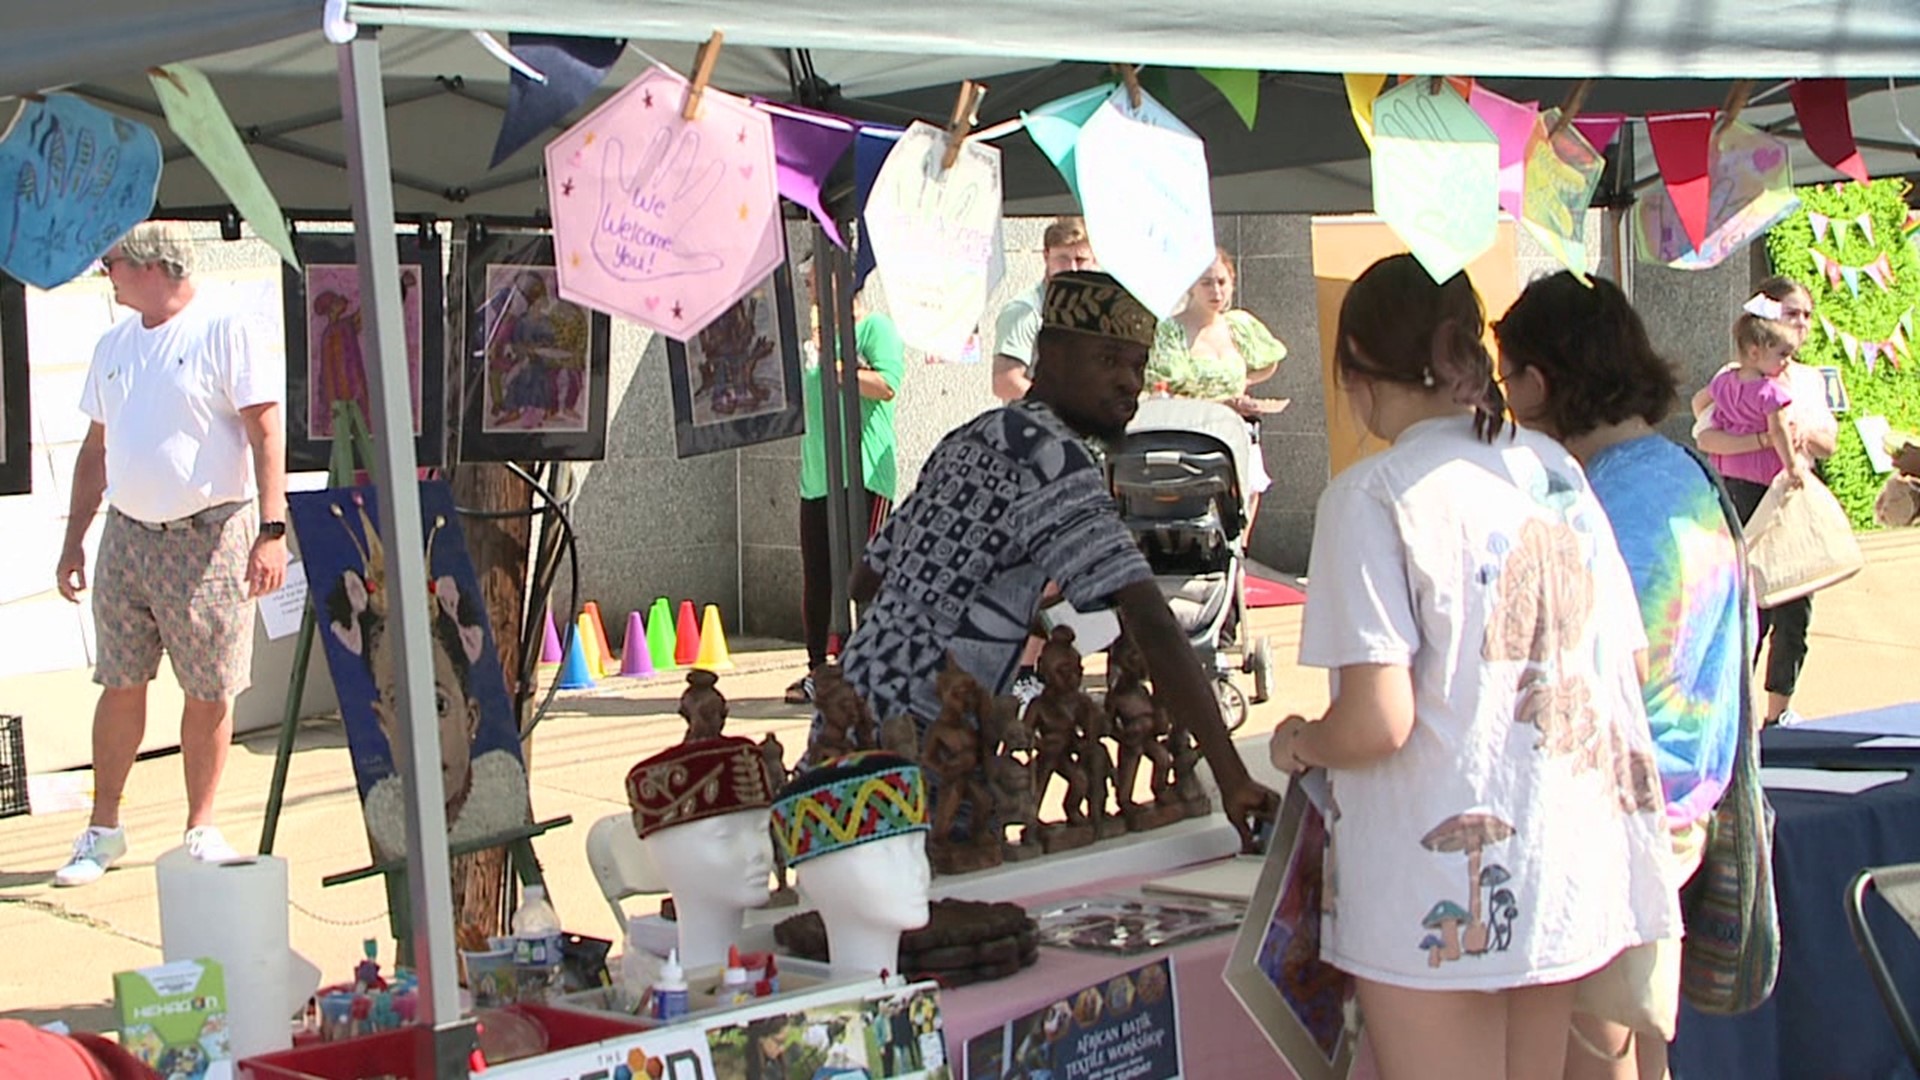 The event was held at the South Side Farmers Market in the city Saturday afternoon.